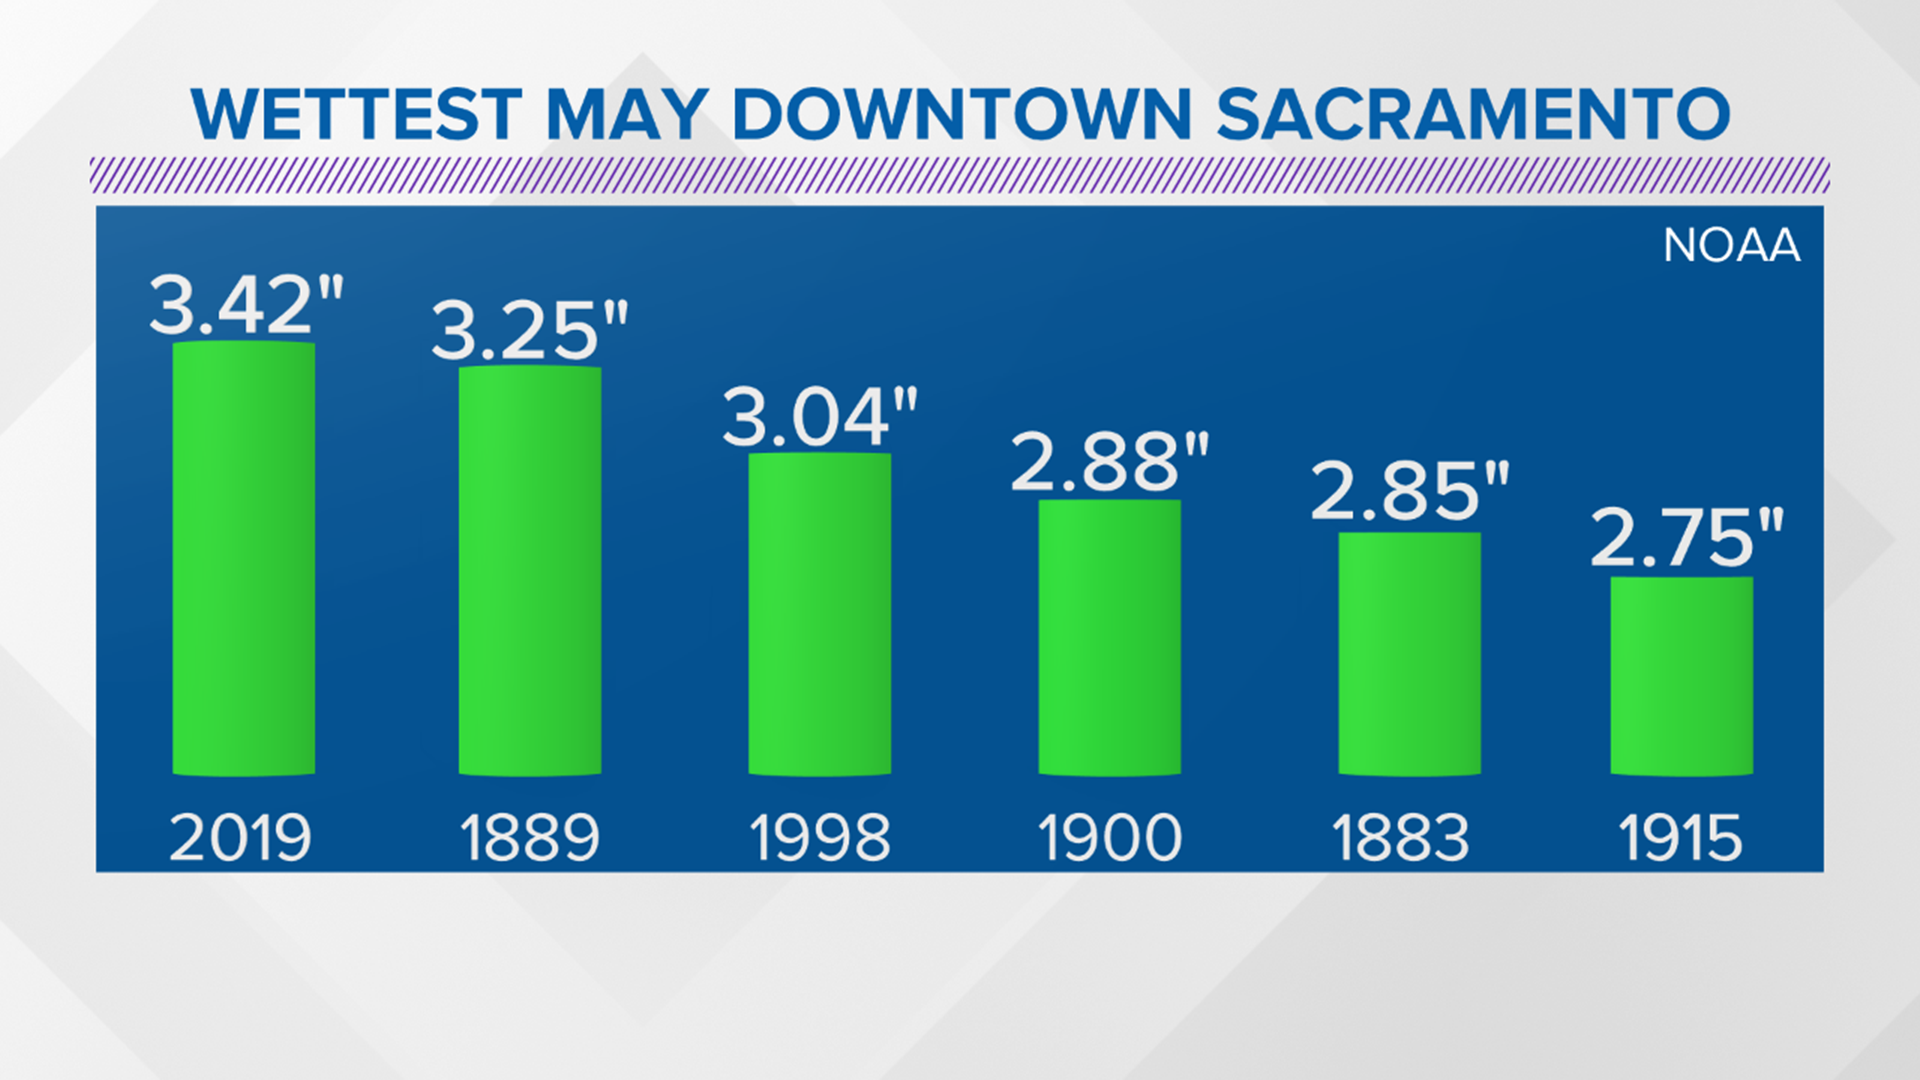 May is typically the time of year when the Central Valley starts to transition to drier, warmer weather. This year, however, was quite the opposite. In fact, numerous storms developed and dropped record-setting rain in the valley!